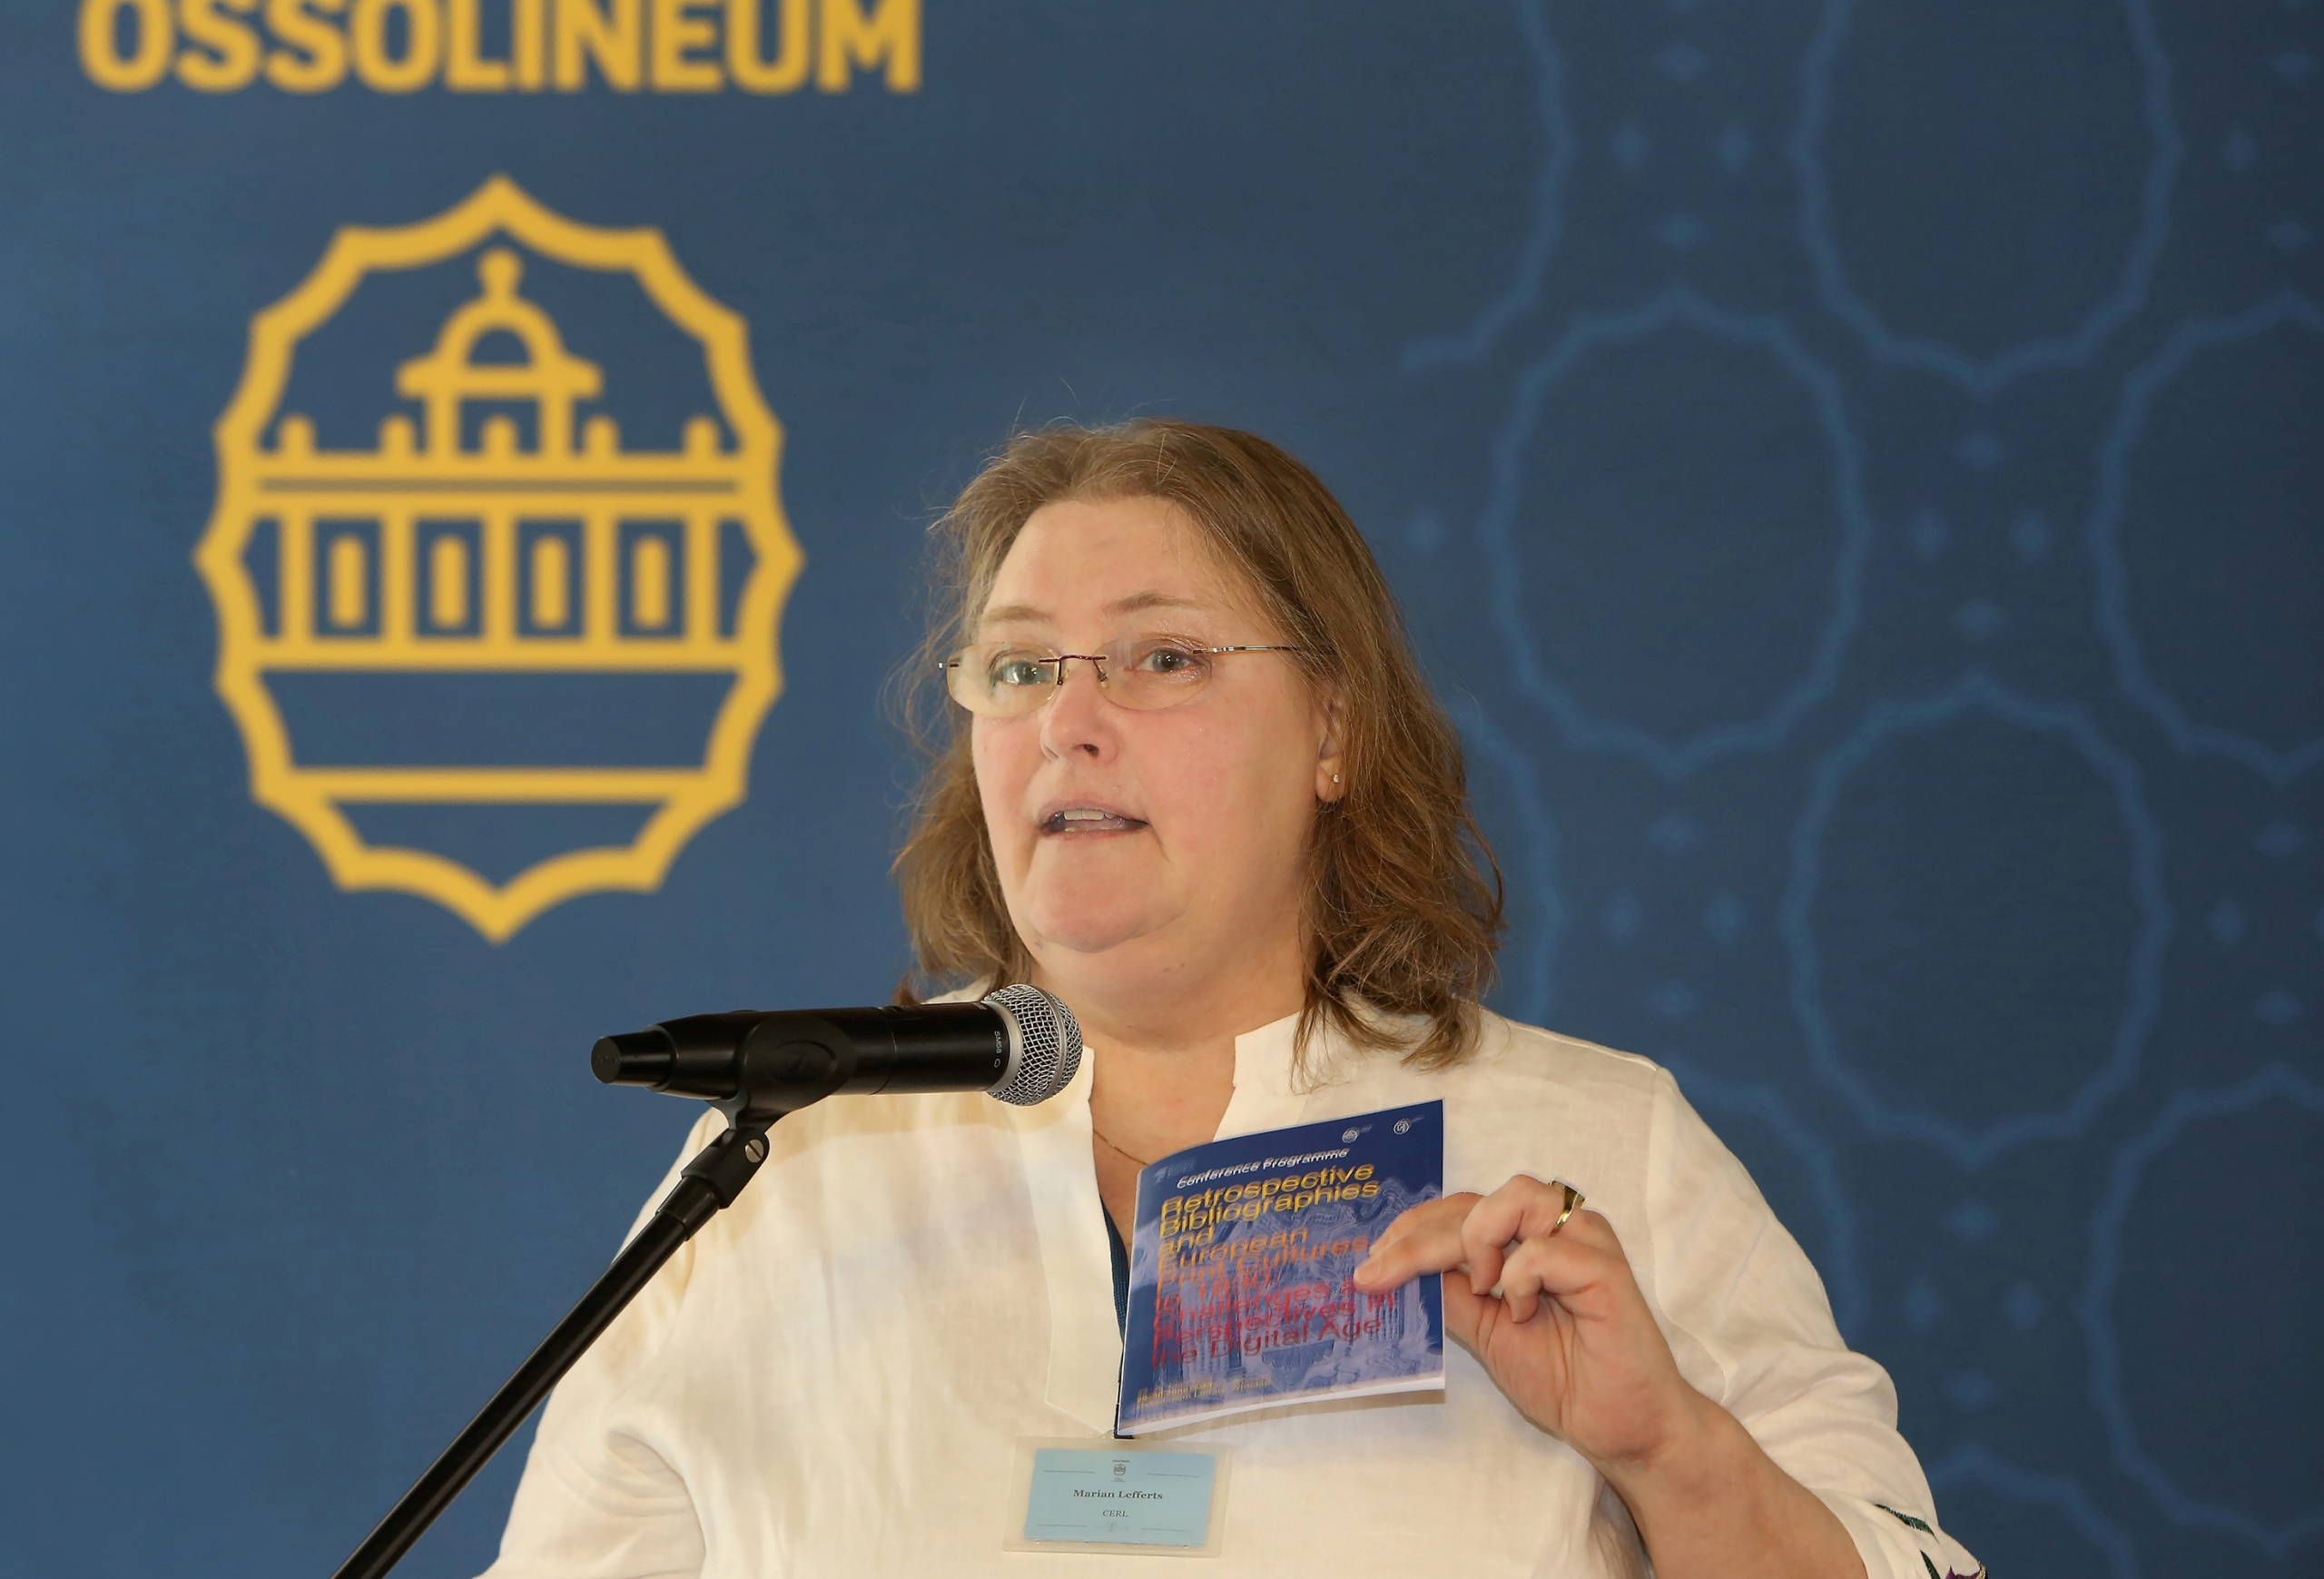 Marian Lefferts, Executive Manager at the Consortium of European Research Libraries (CERL).